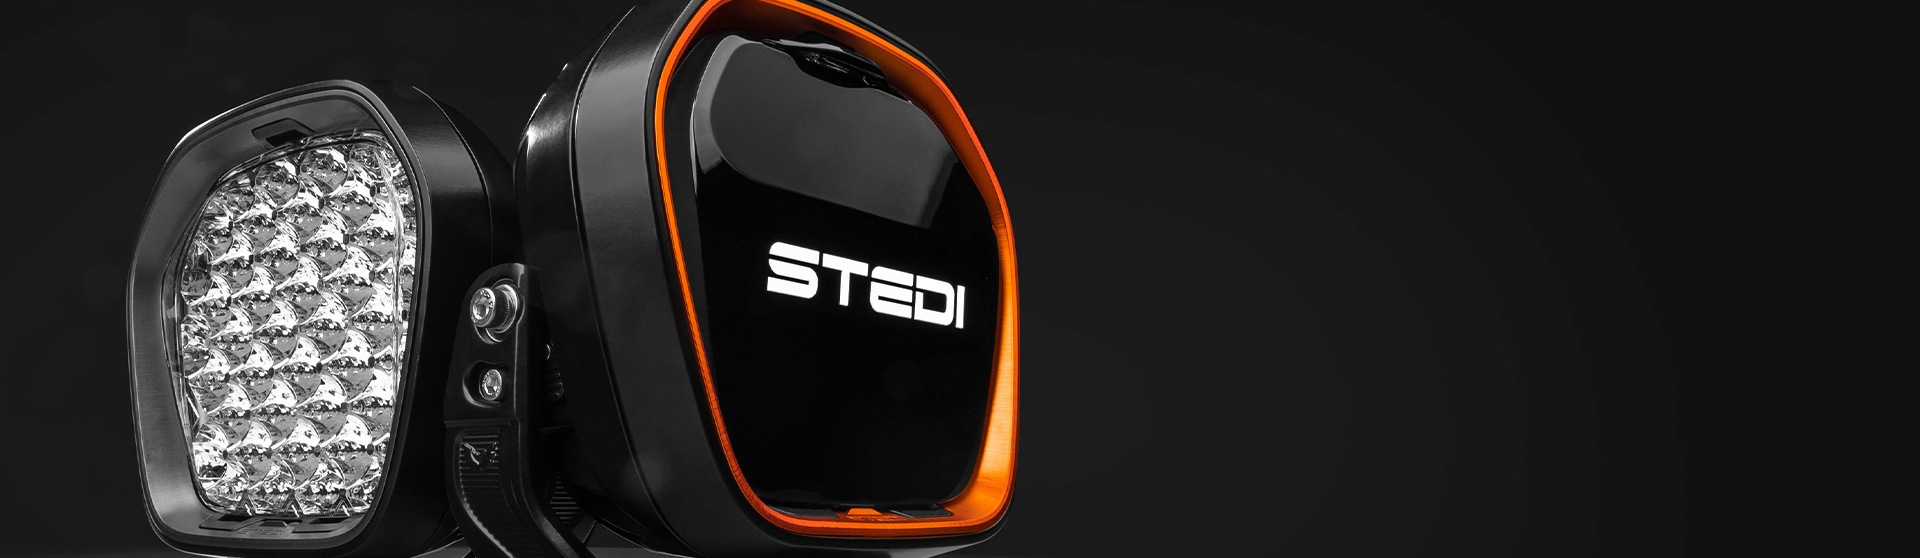 Stedi – TYPE-X Evo LED Driving Lights Available Now